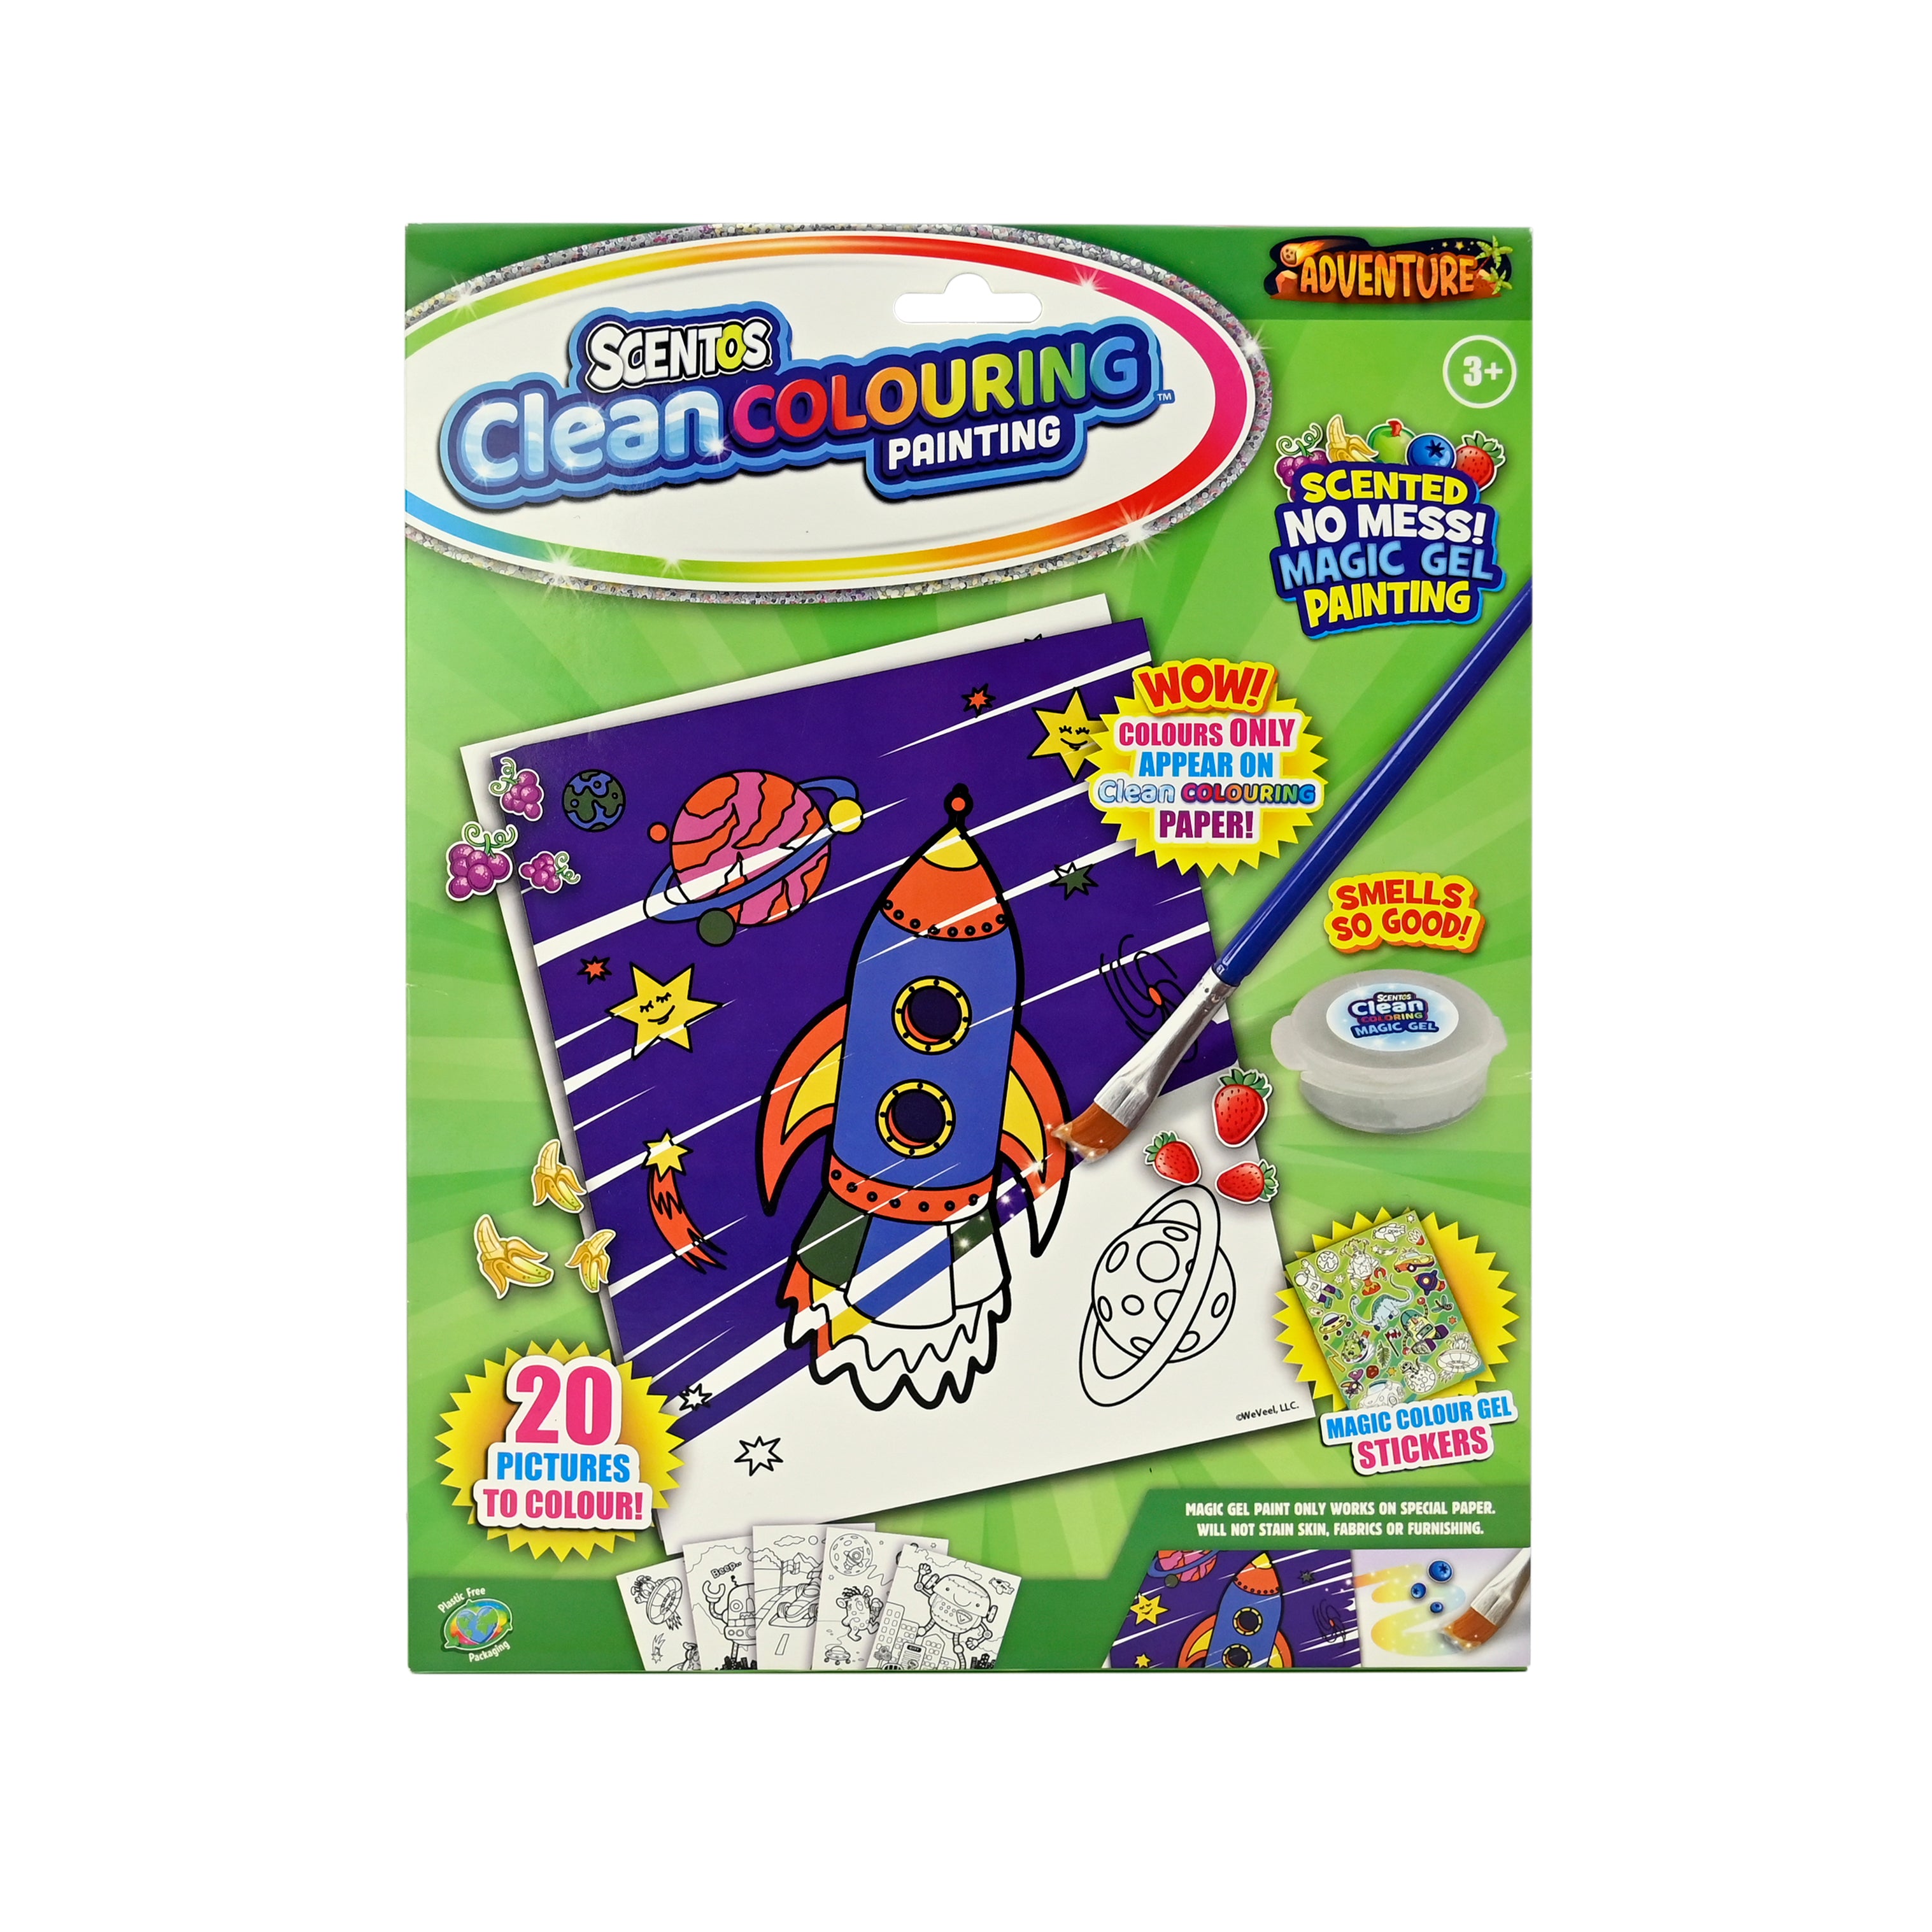 Scentos Clean Colouring Painting - Adventure